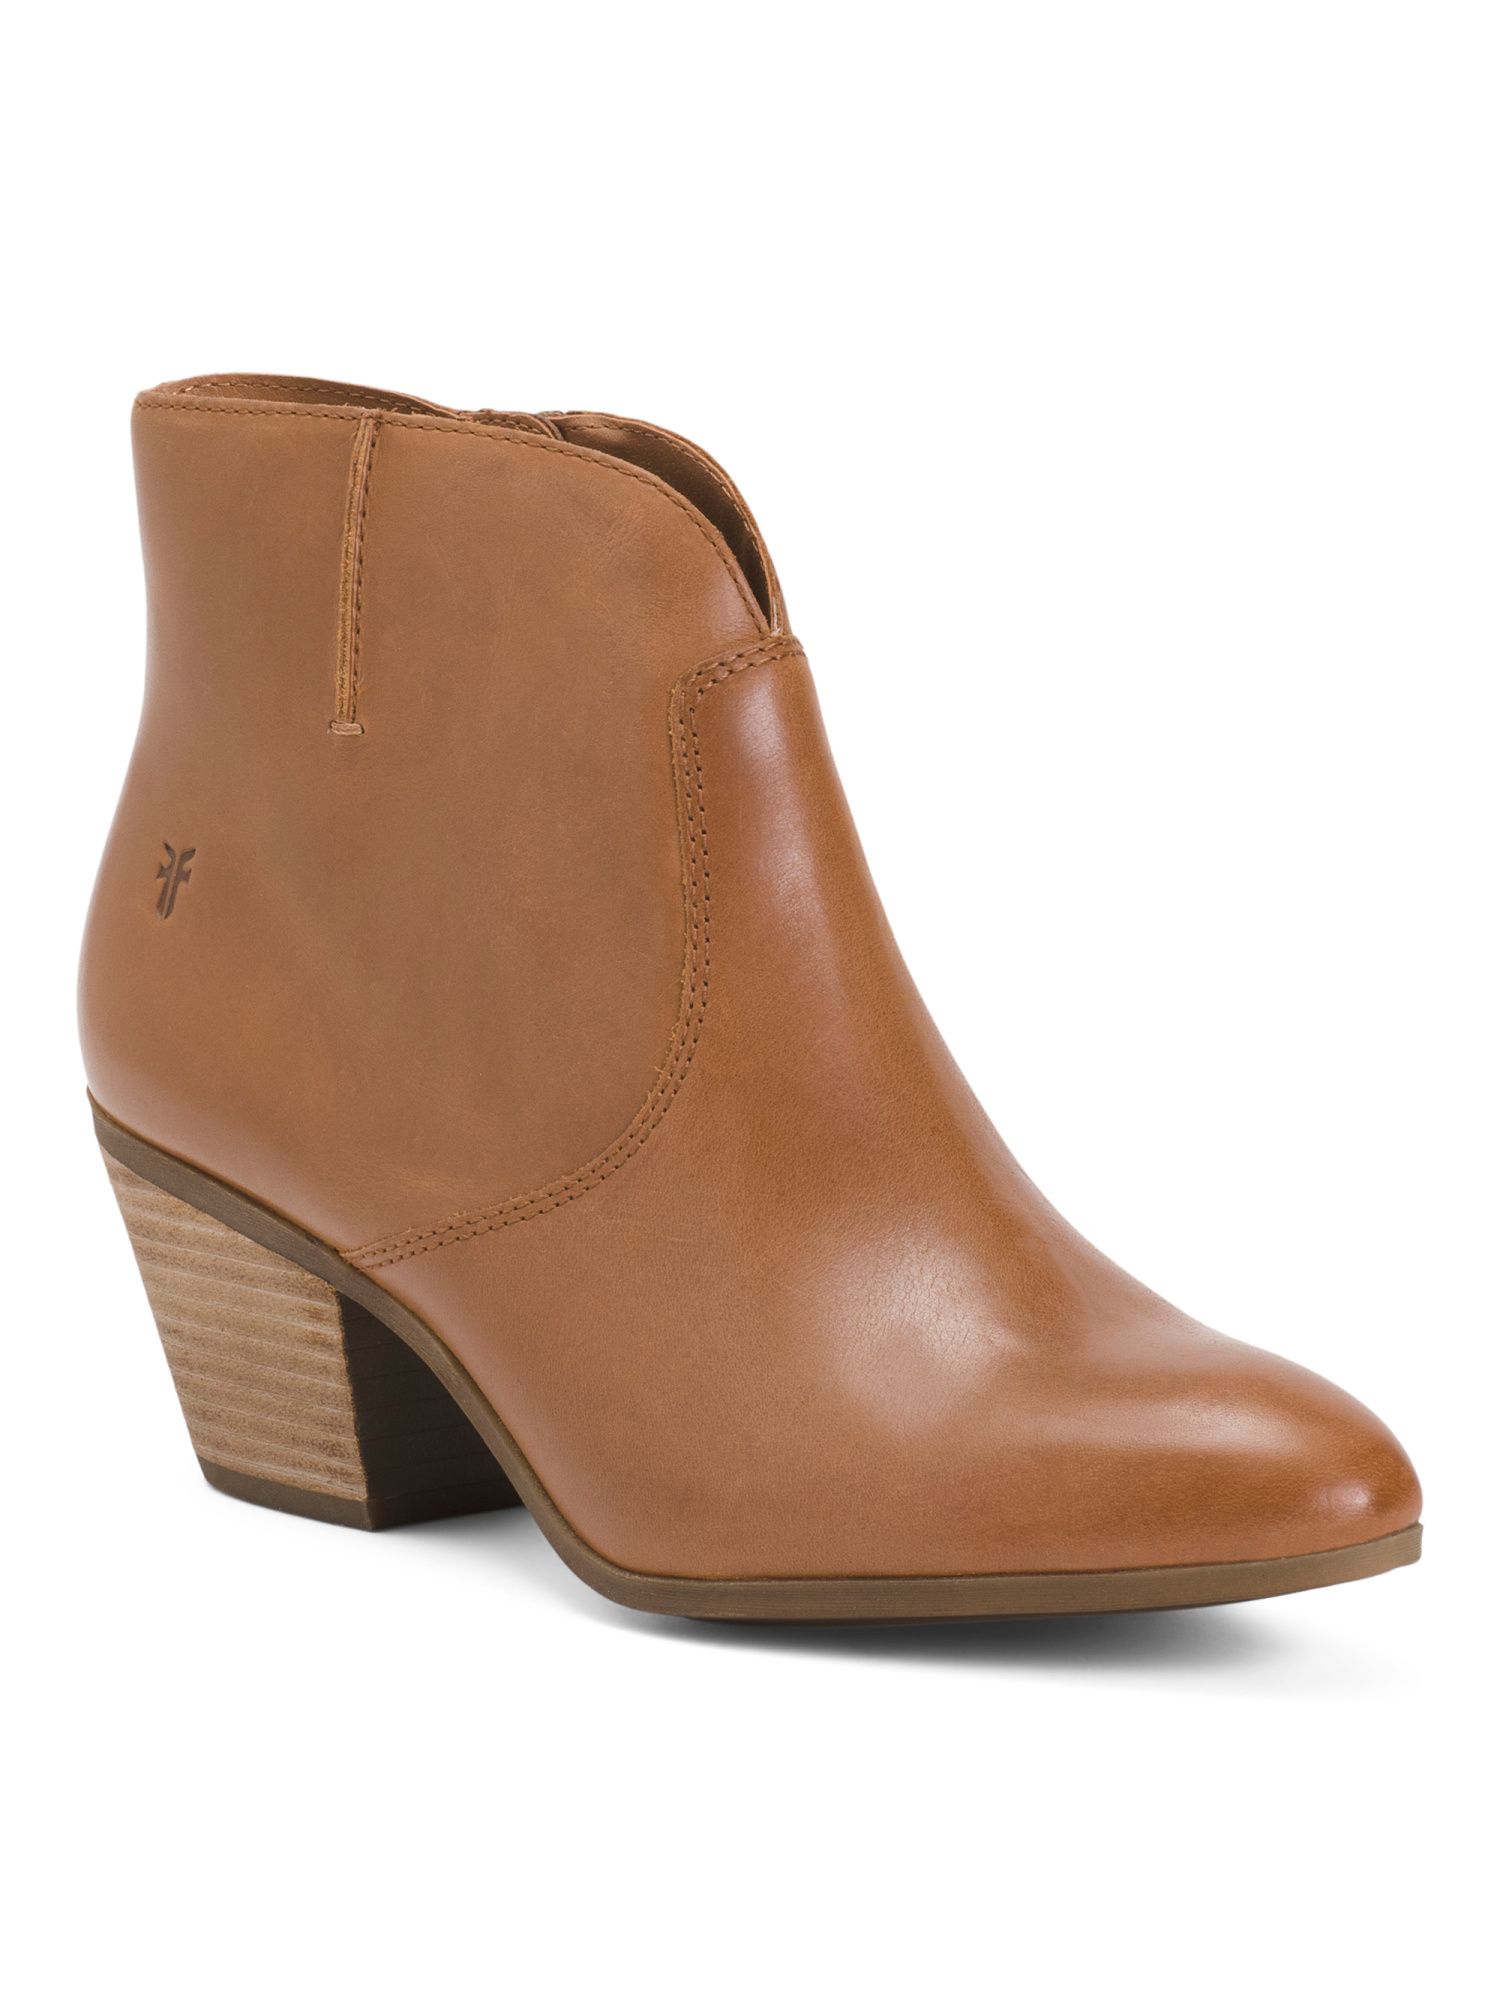 Leather Booties | TJ Maxx